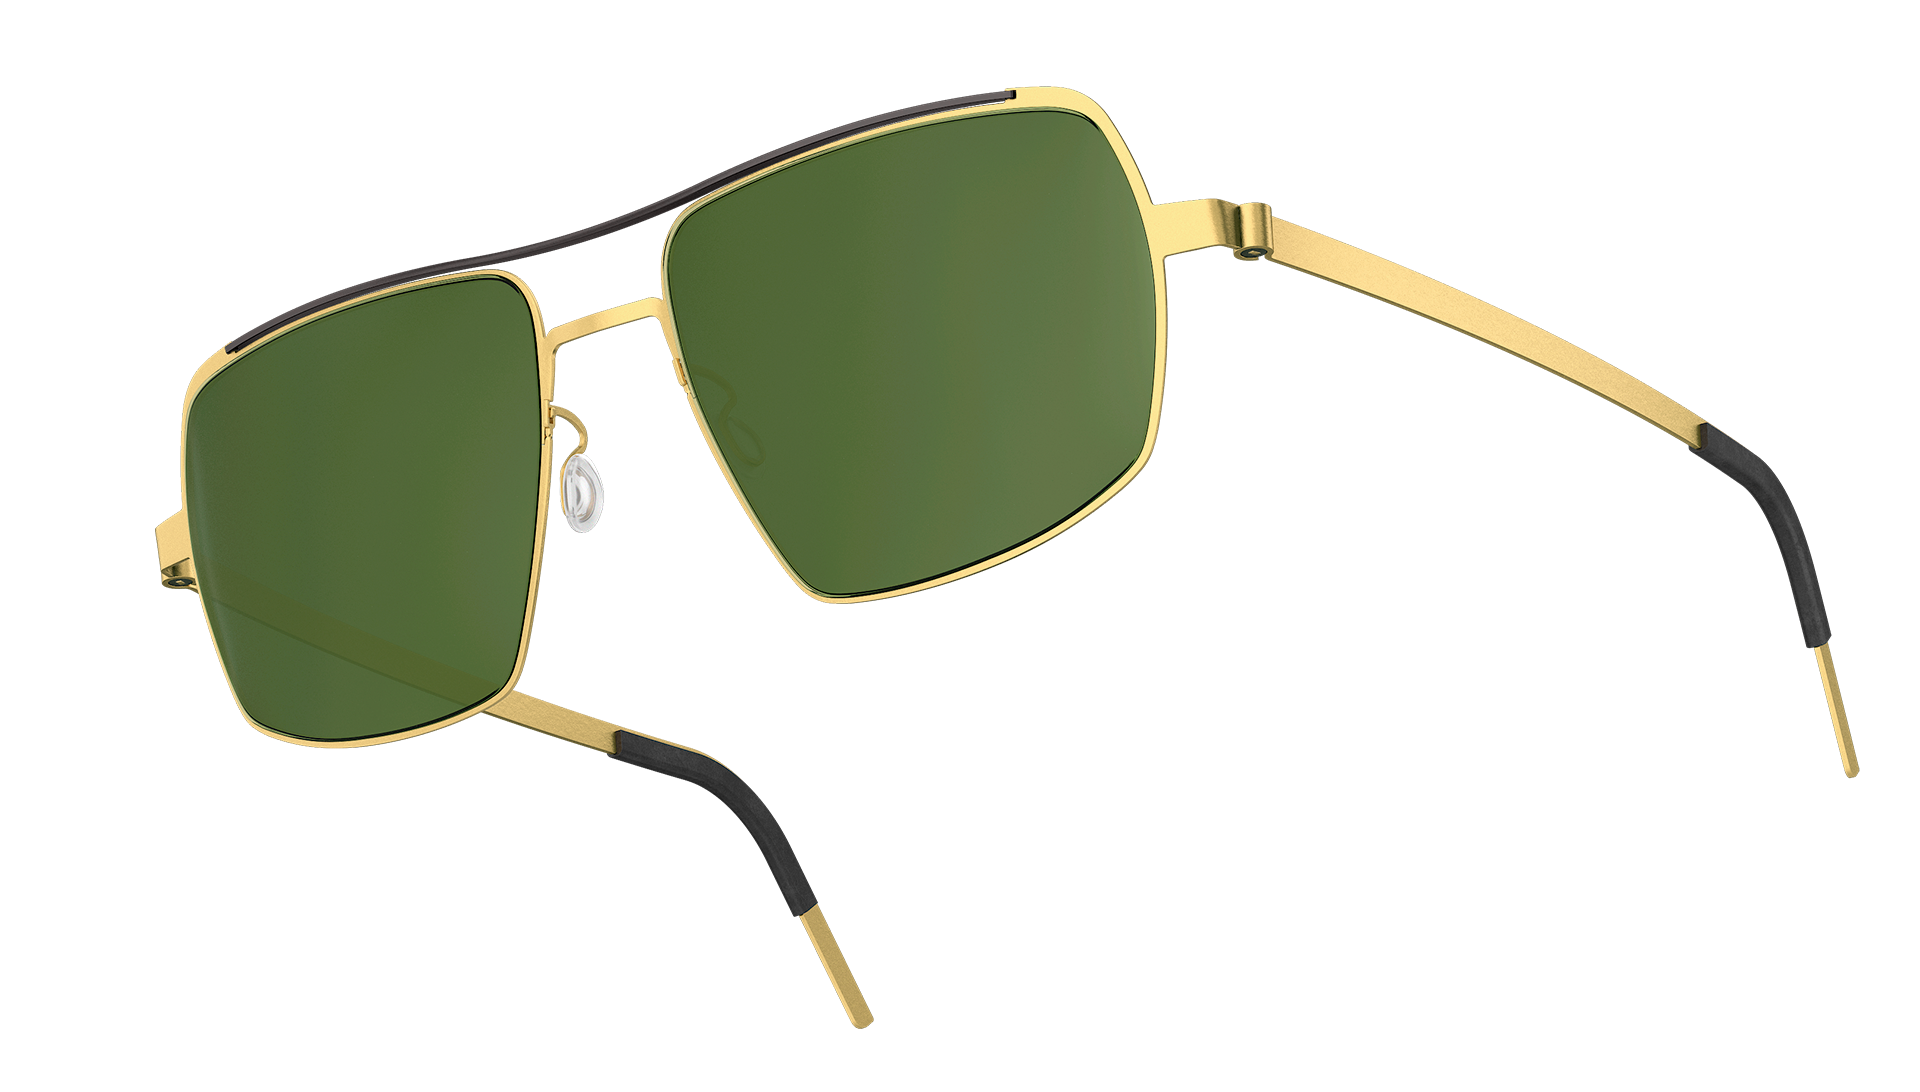 LINDBERG Model 8909 GT gold tone double bar bridge glasses in a rounded square shape with green tinted lenses